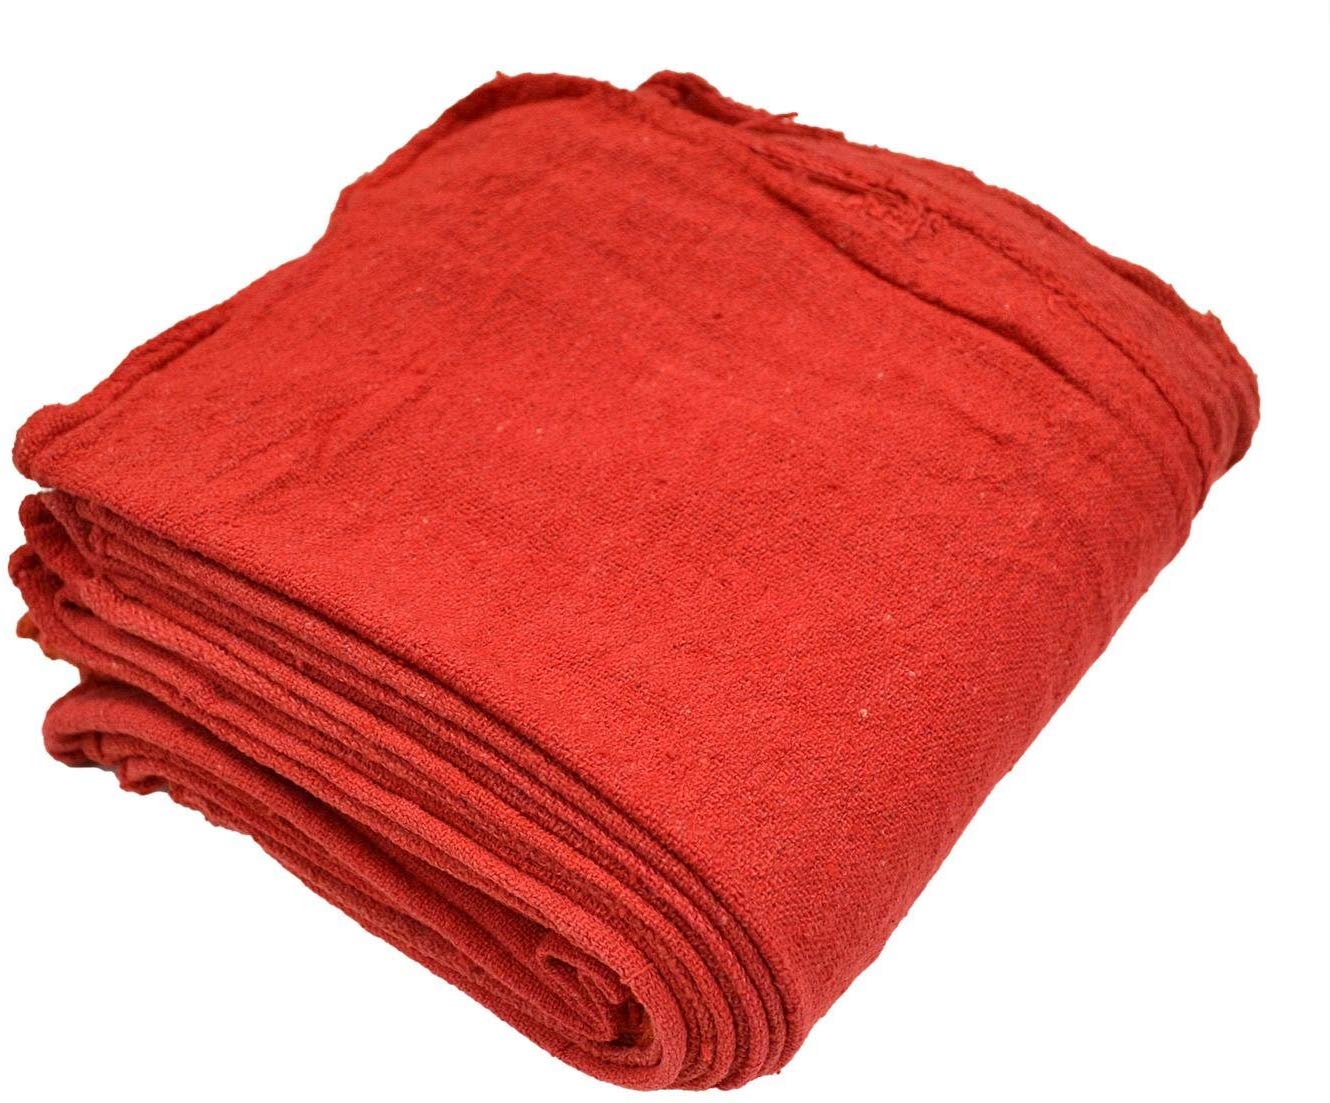 New Cleaning Towels red Large 14x14 Industrial Shop Rags 30pc